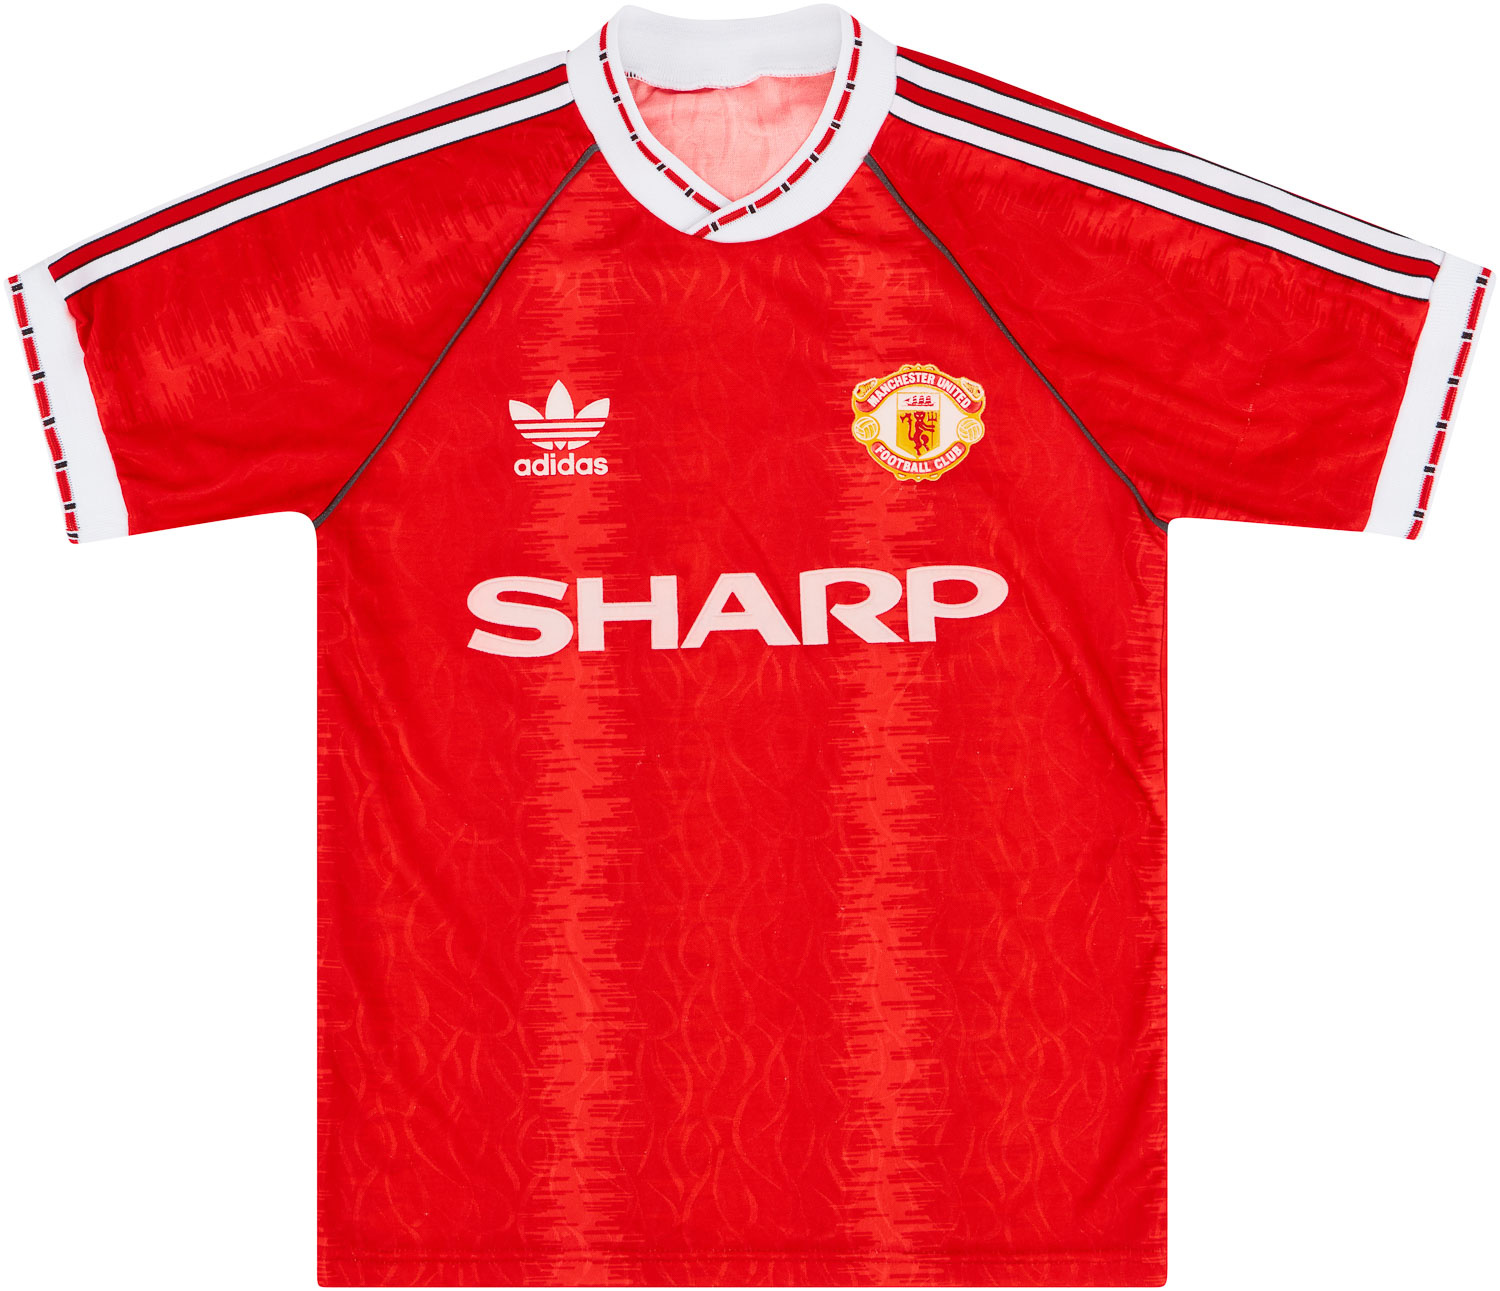 1990-92 Manchester United Home Shirt